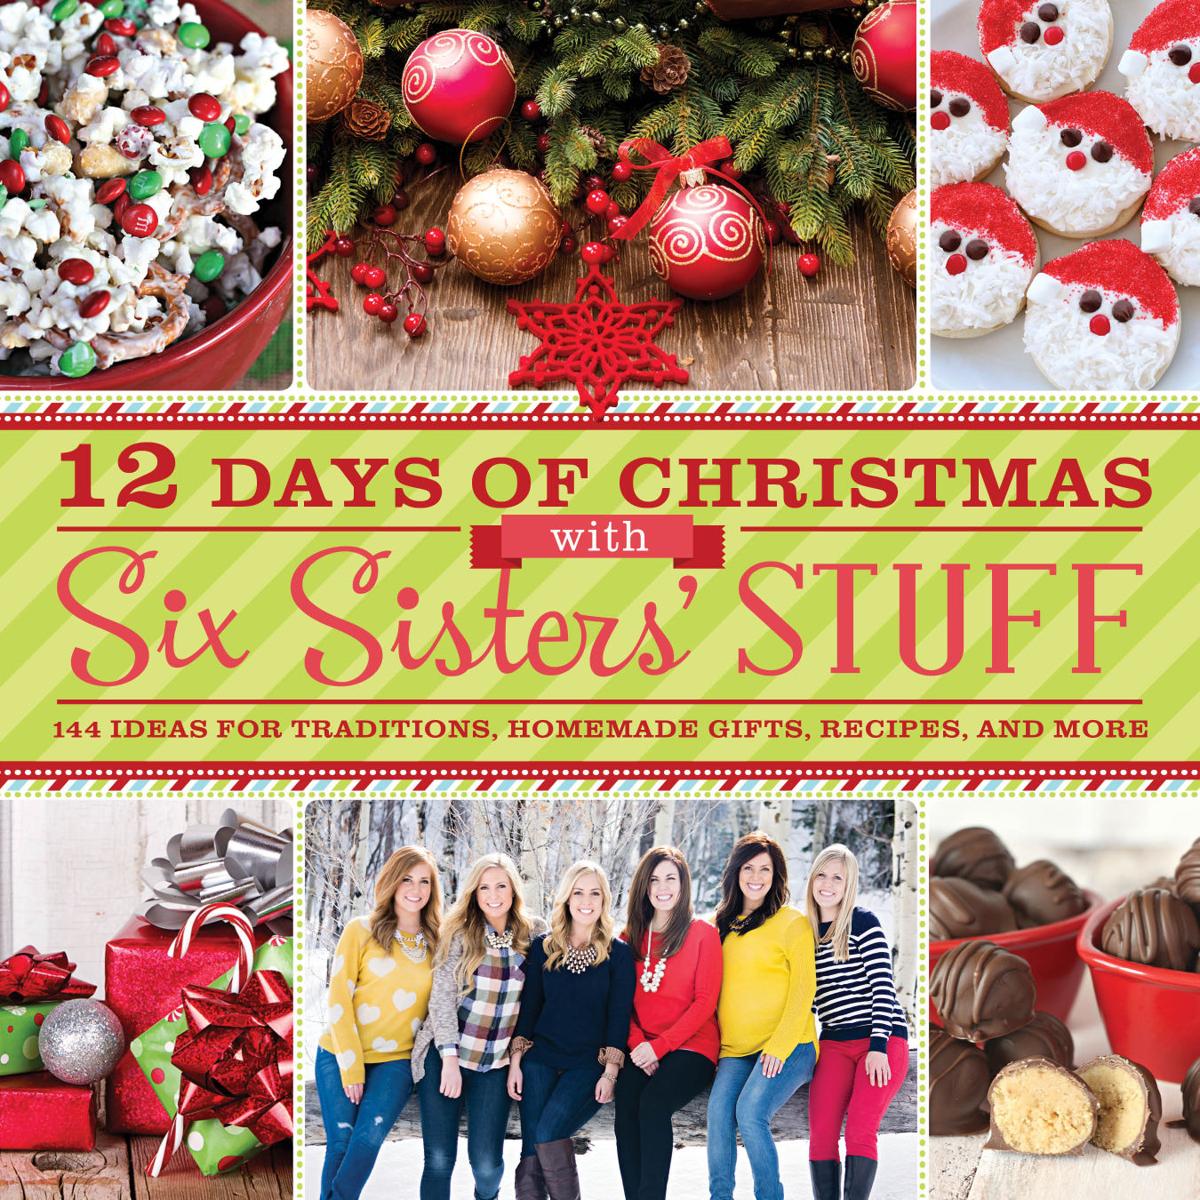 New Christmas Book Shares Six Sisters Stuff S Favorite Parts Of Holiday Food Ivpressonline Com